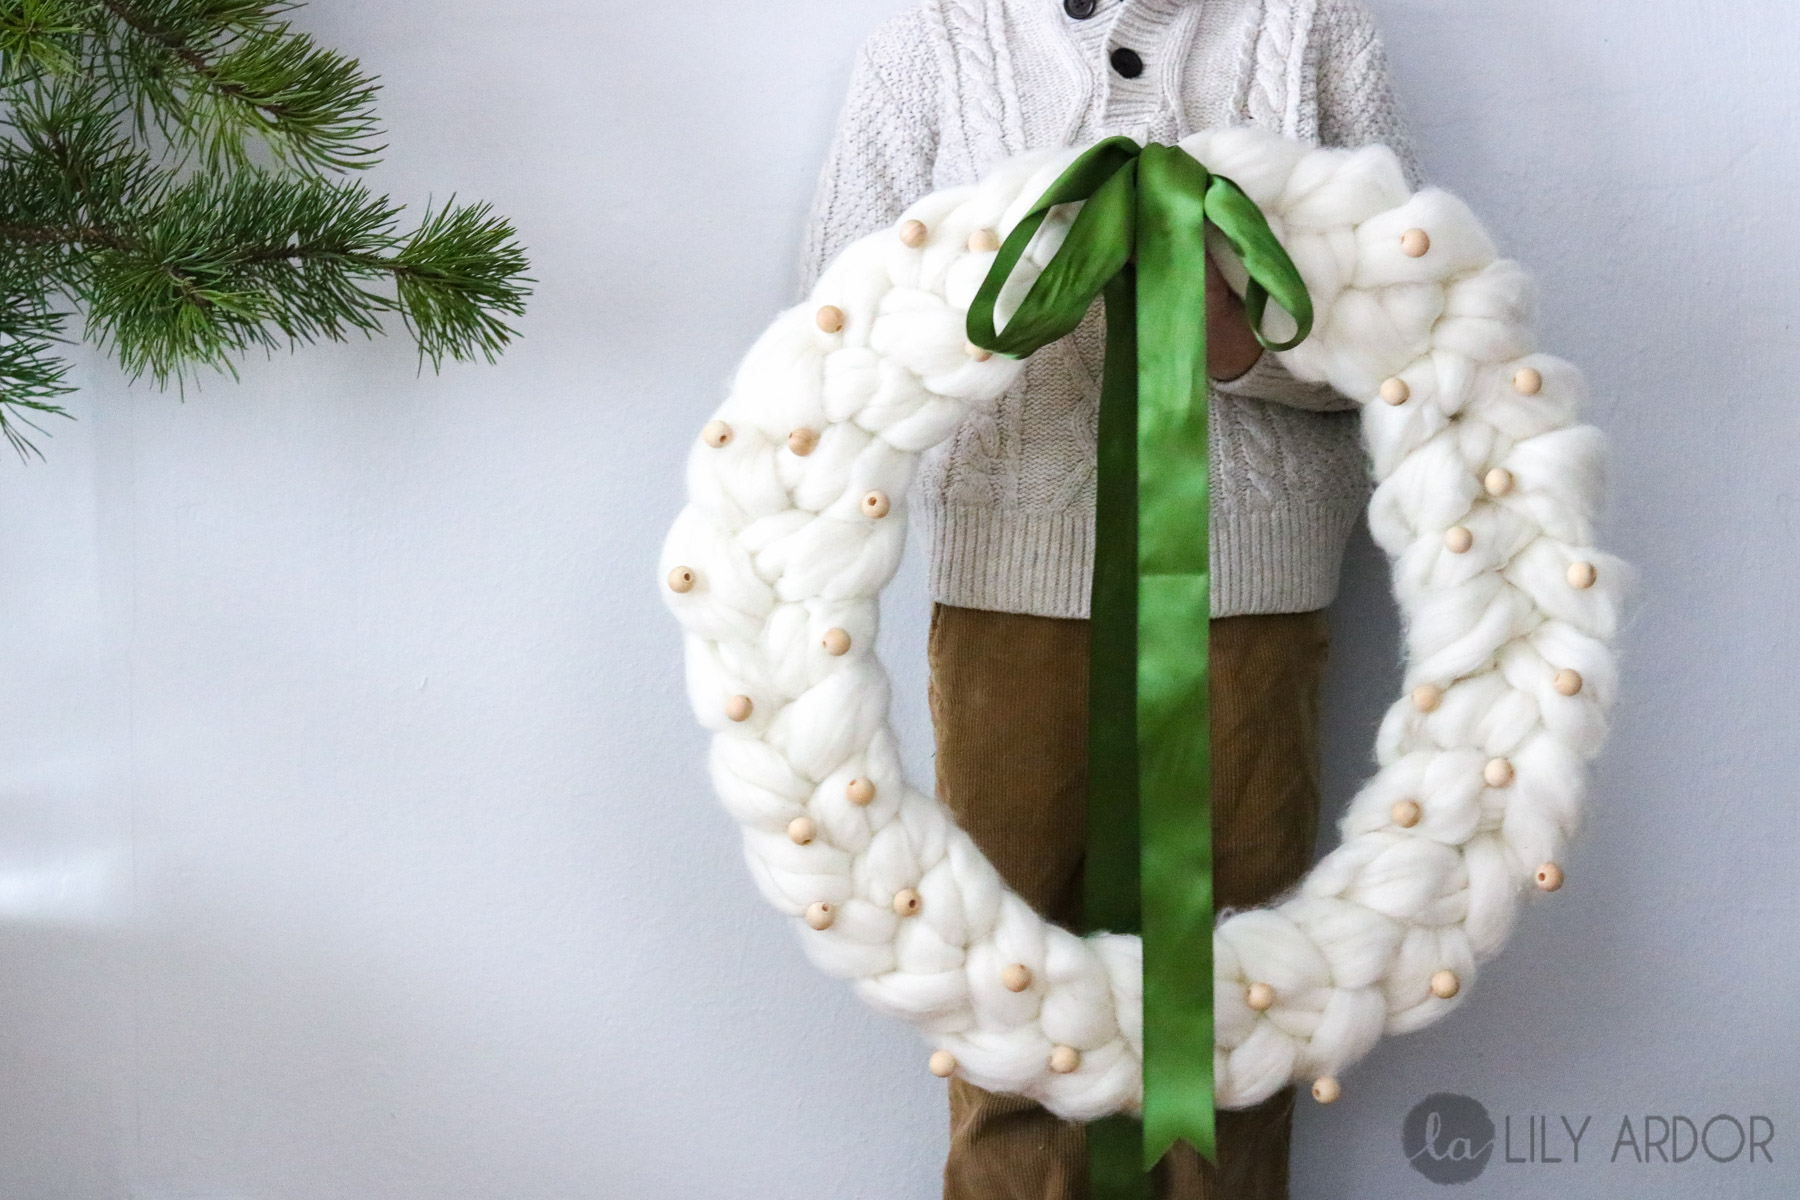 Chunky Knit Wreath (part 3 of chunky knit series)